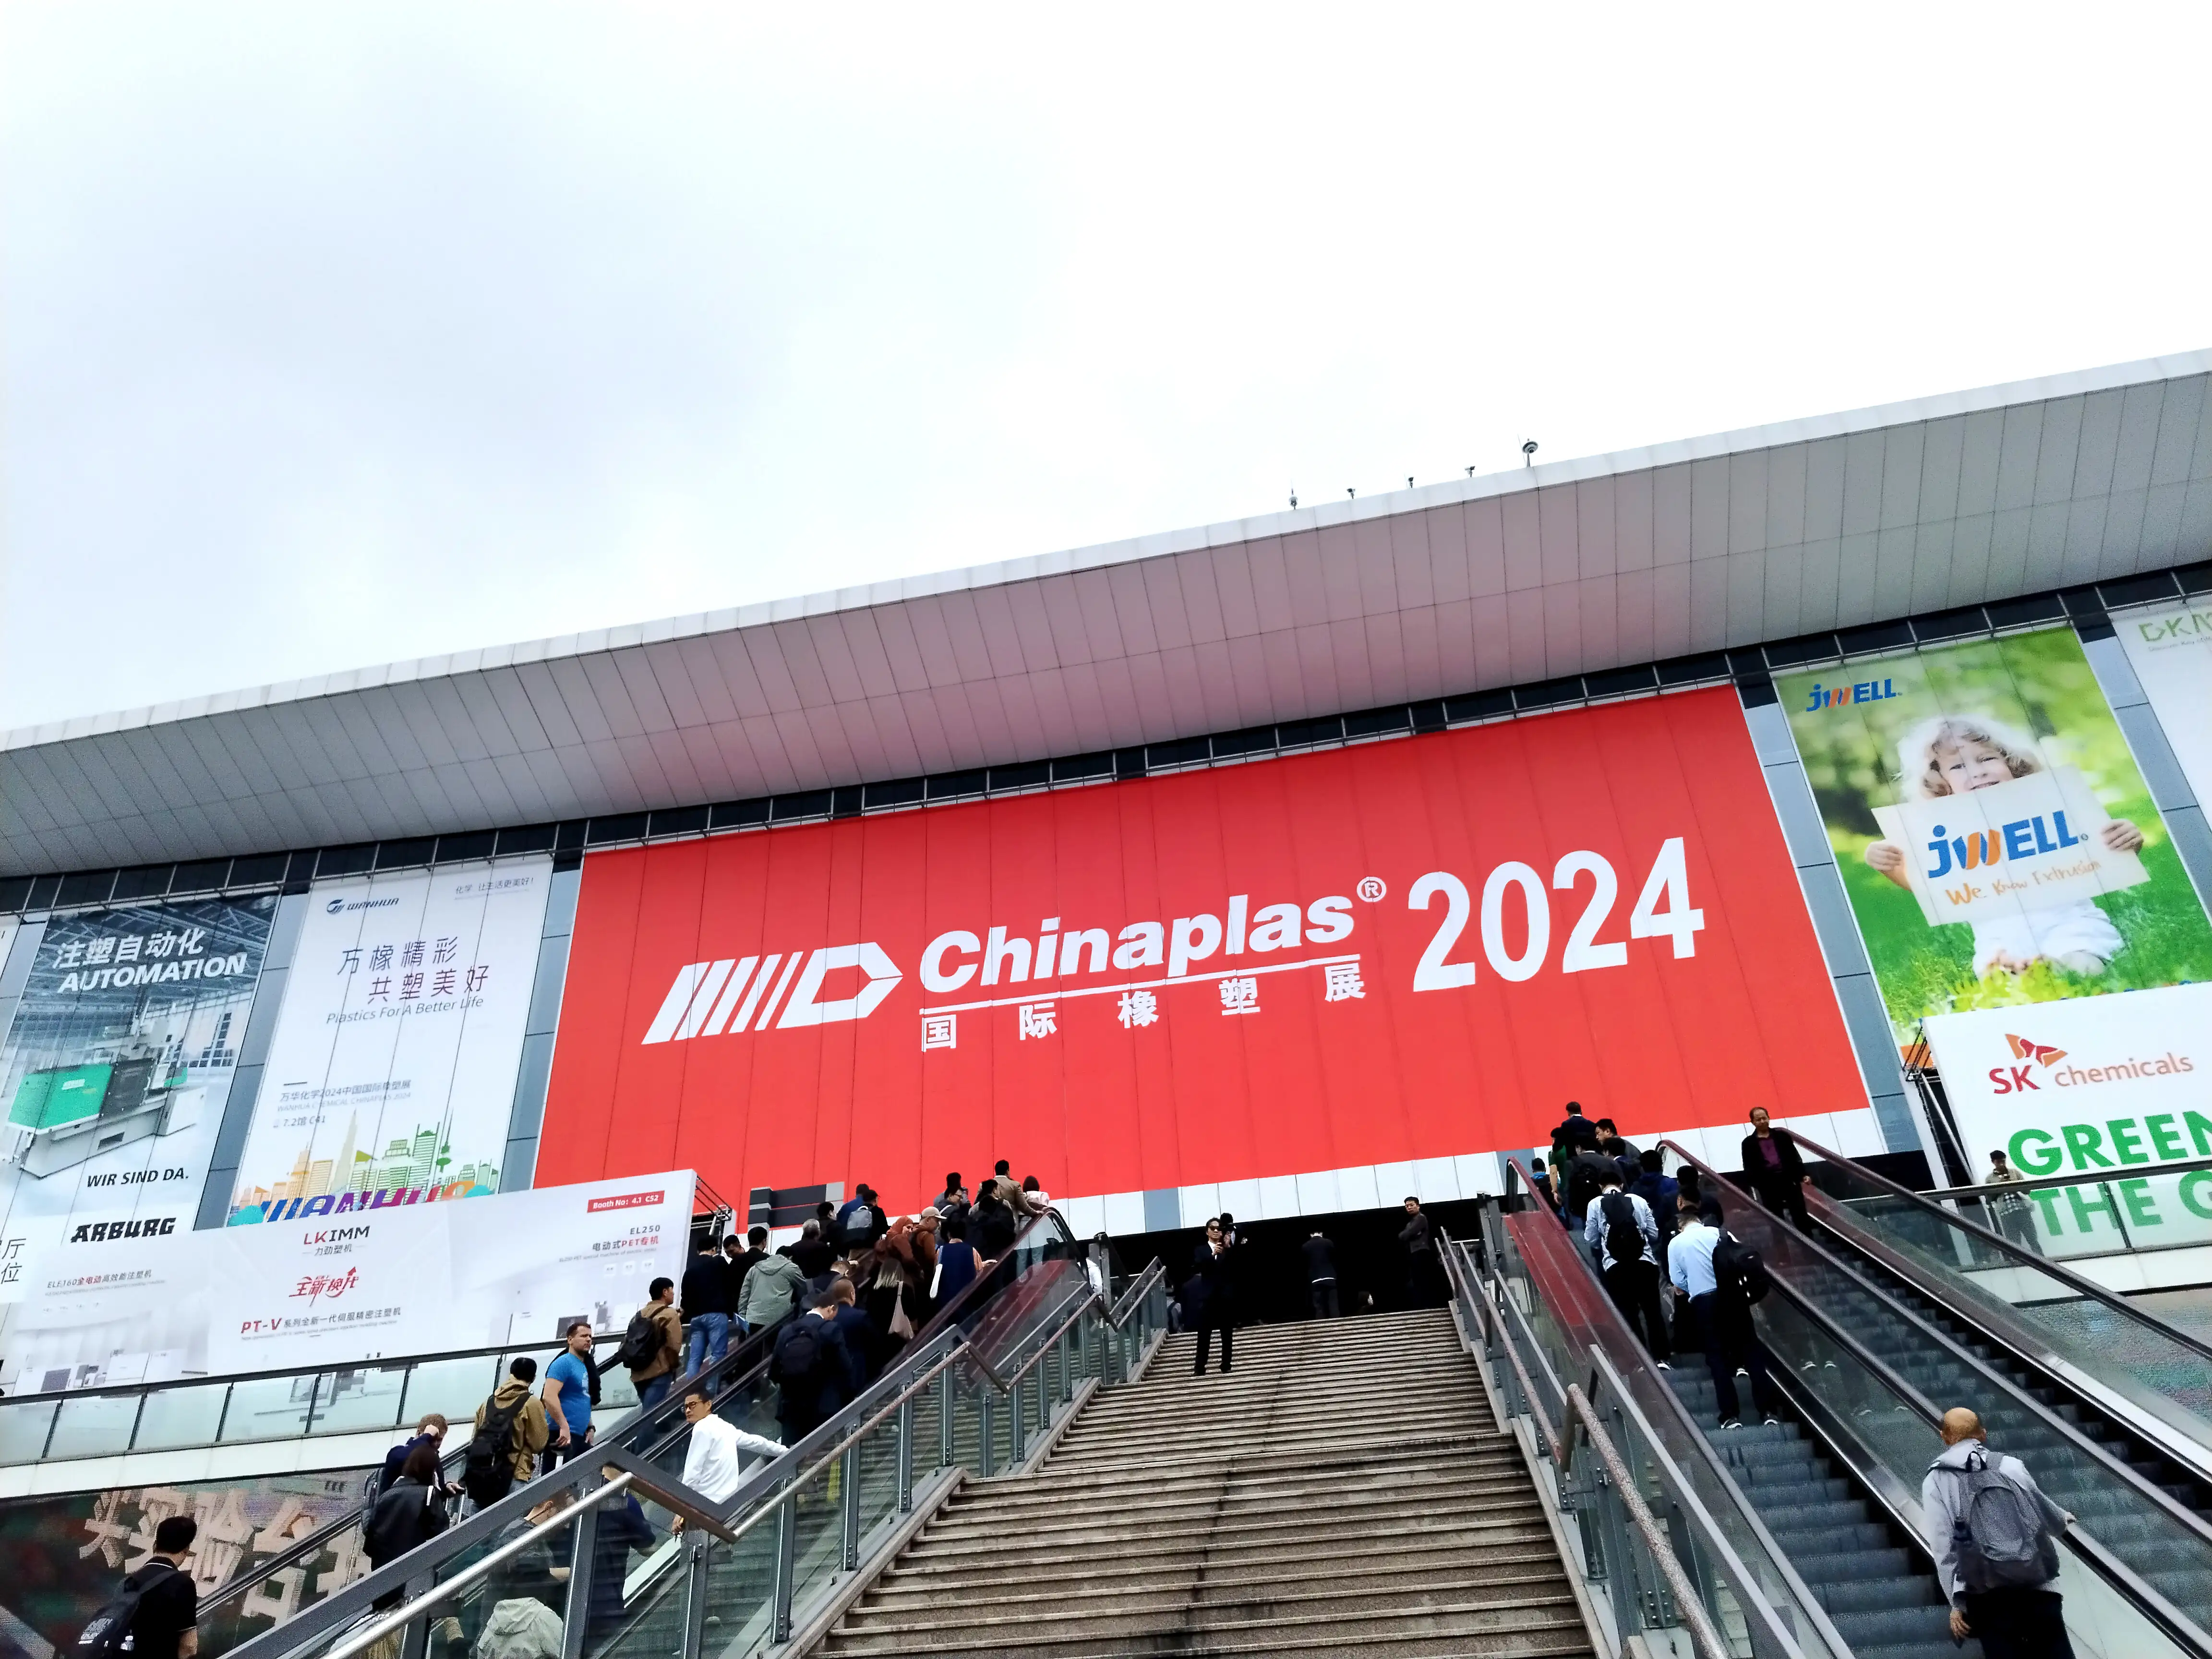 International Rubber and Plastics Exhibition at Shanghai National Exhibition